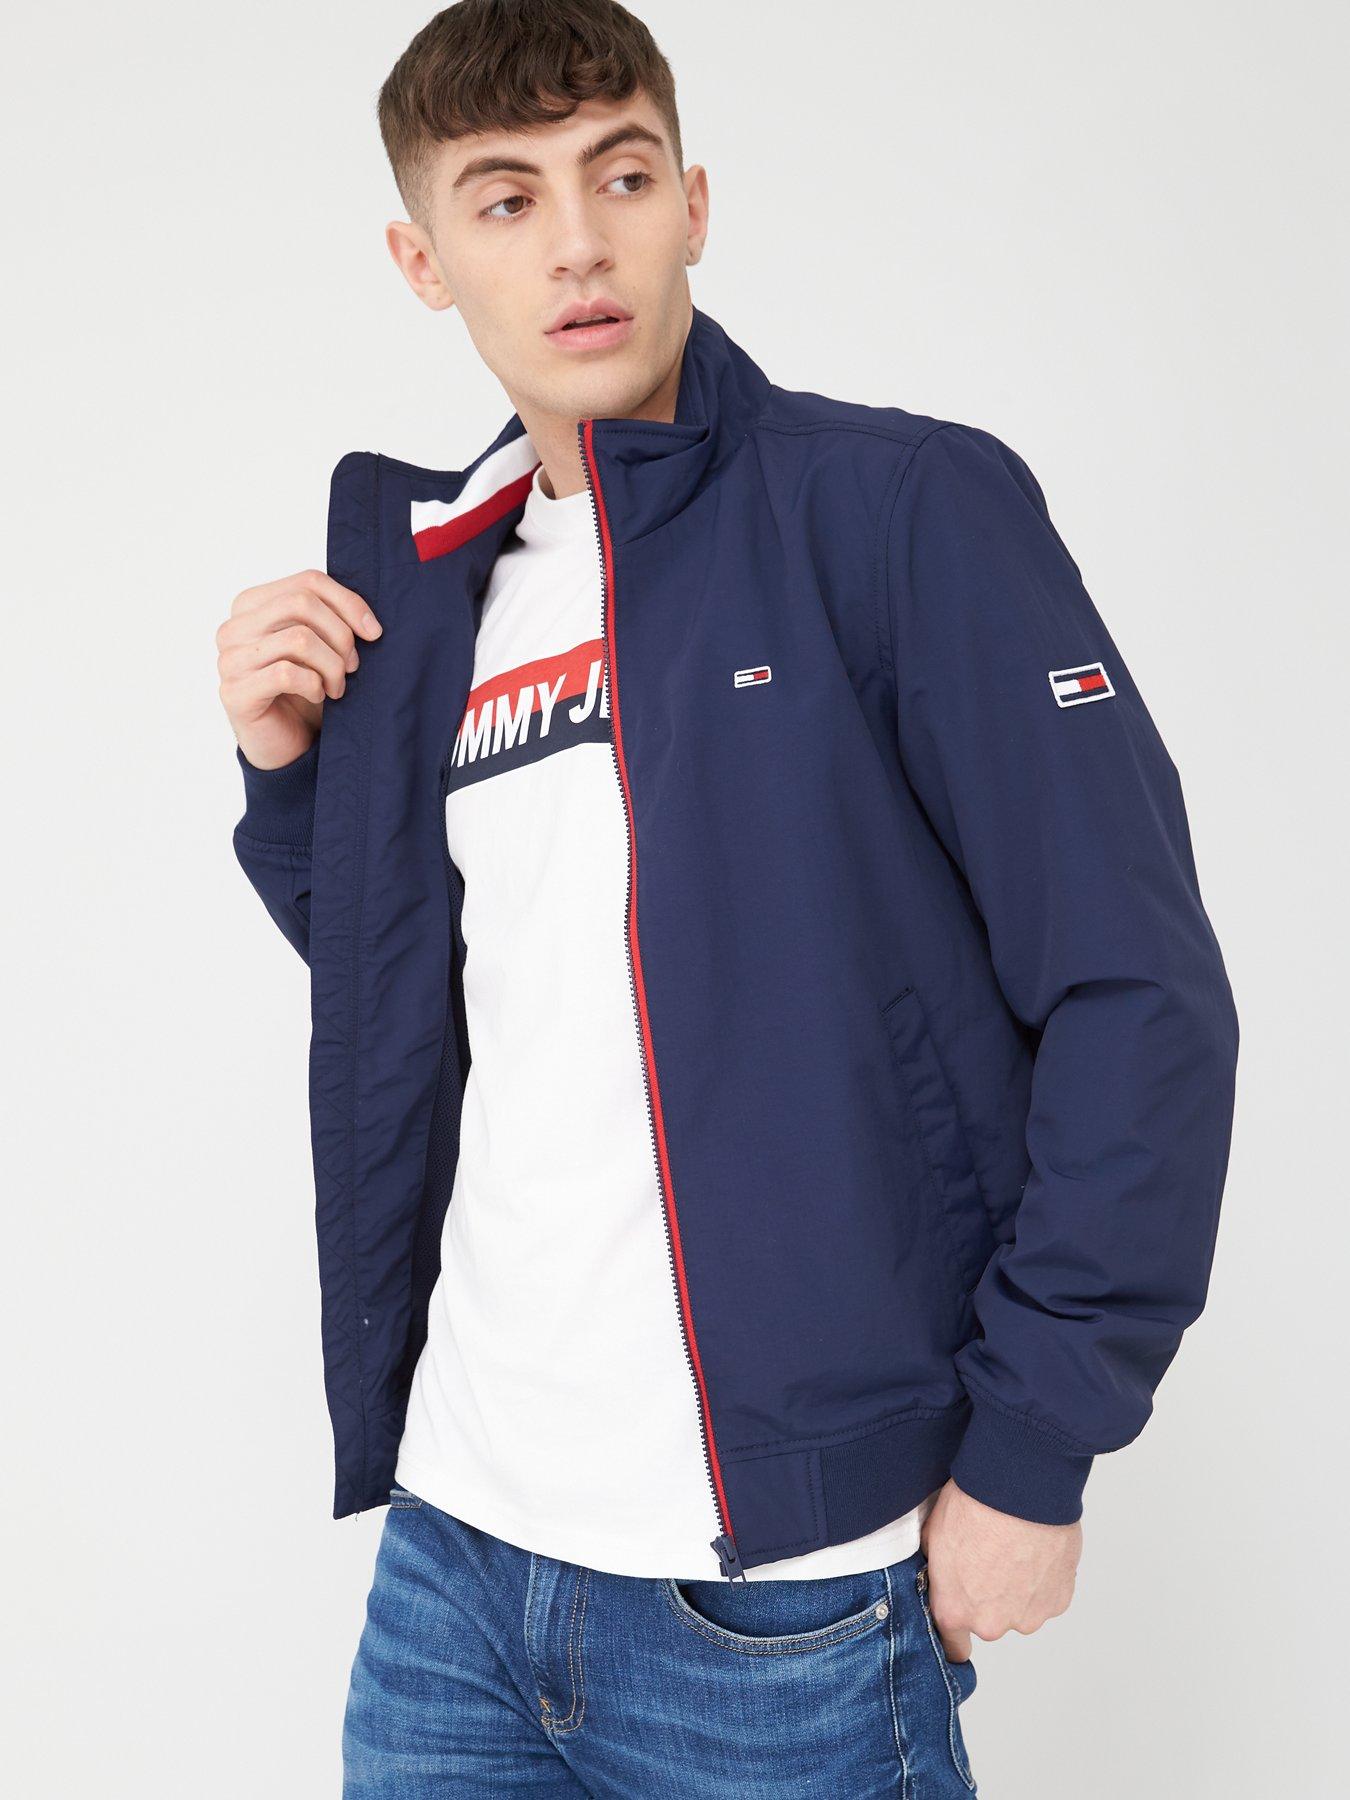 tommy jeans essential bomber